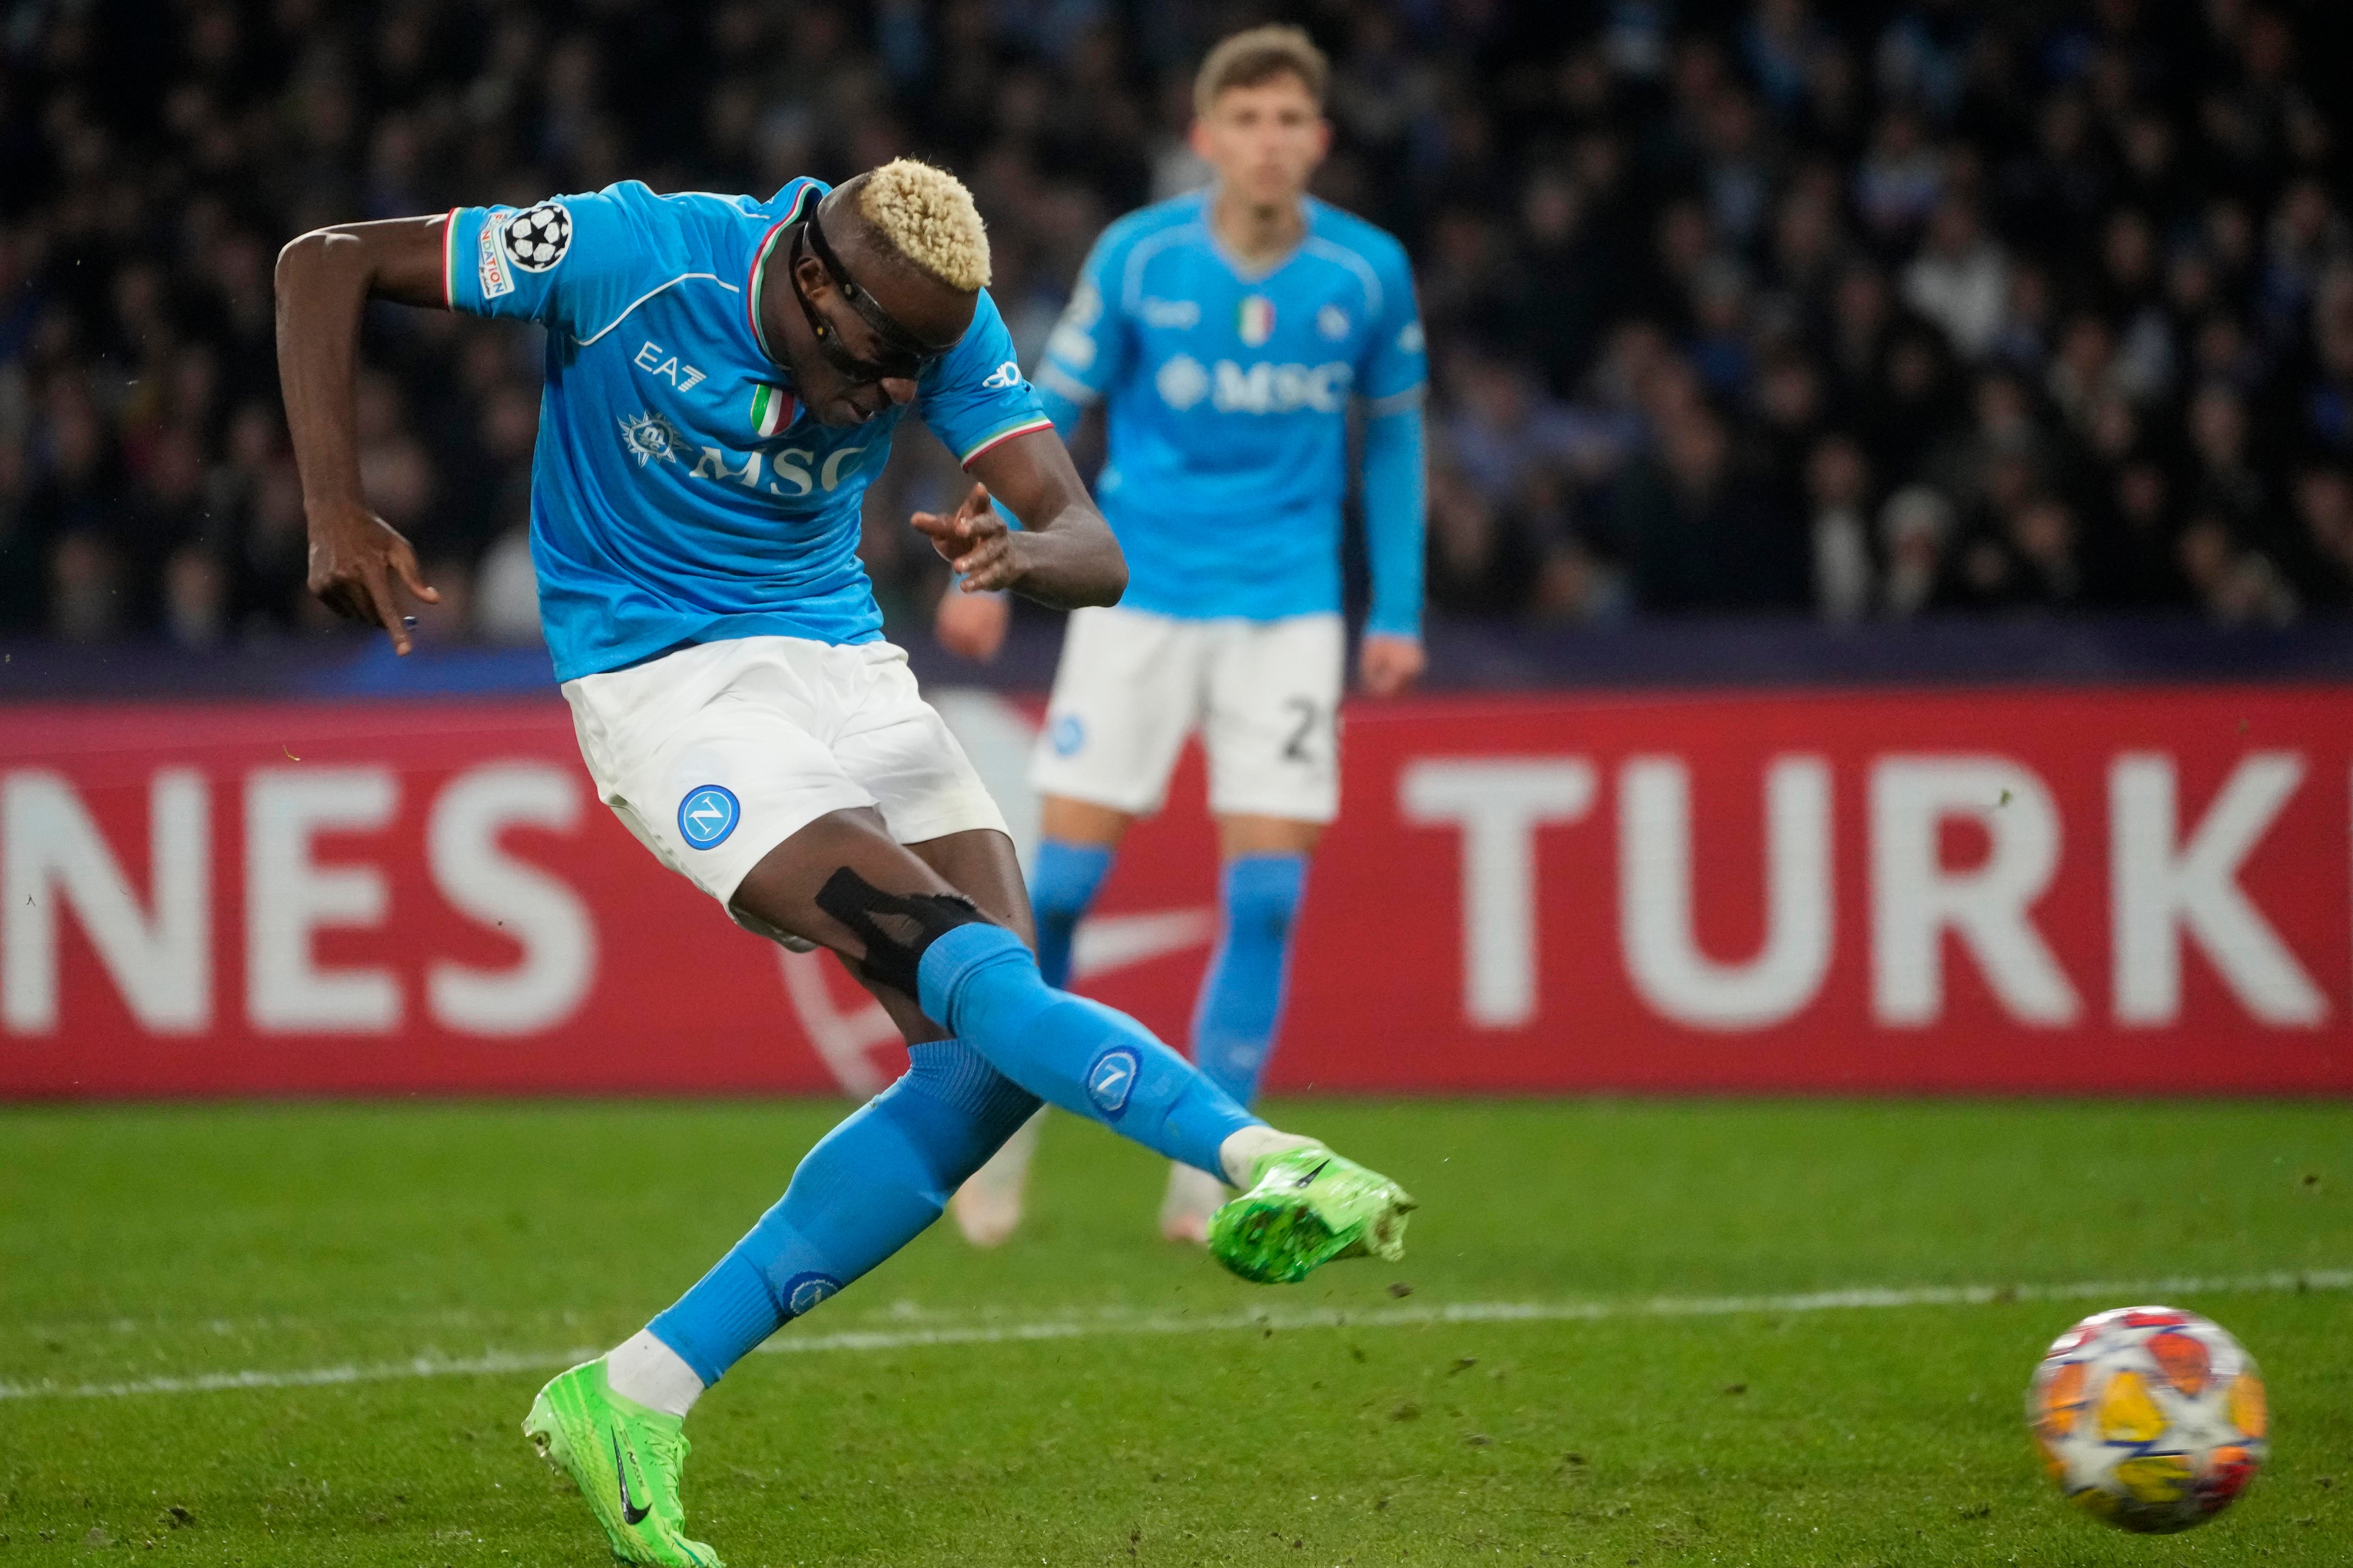 Victor Osimhen equalised for Napoli after Barcelona took the lead